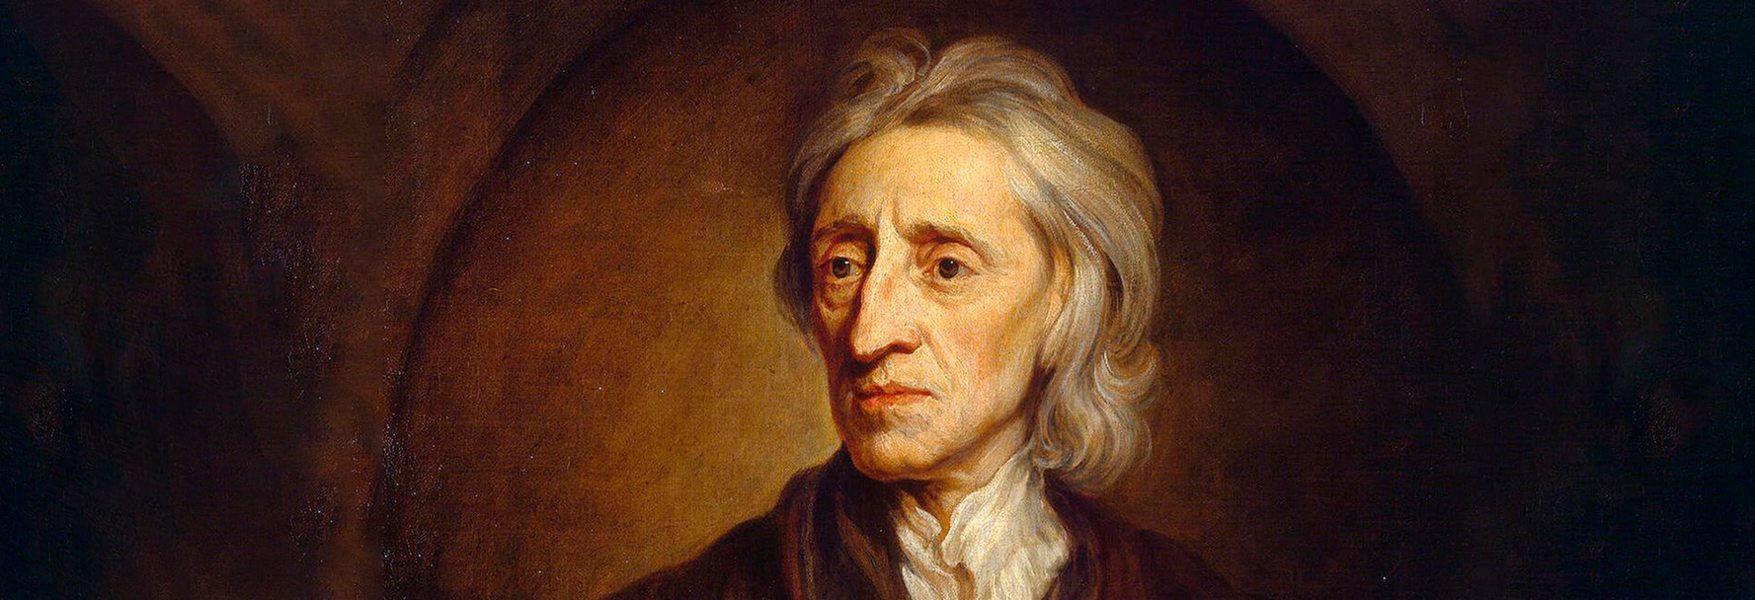 John Locke, the Philosopher Who Capped Off the Scientific Revolution |  OpenMind